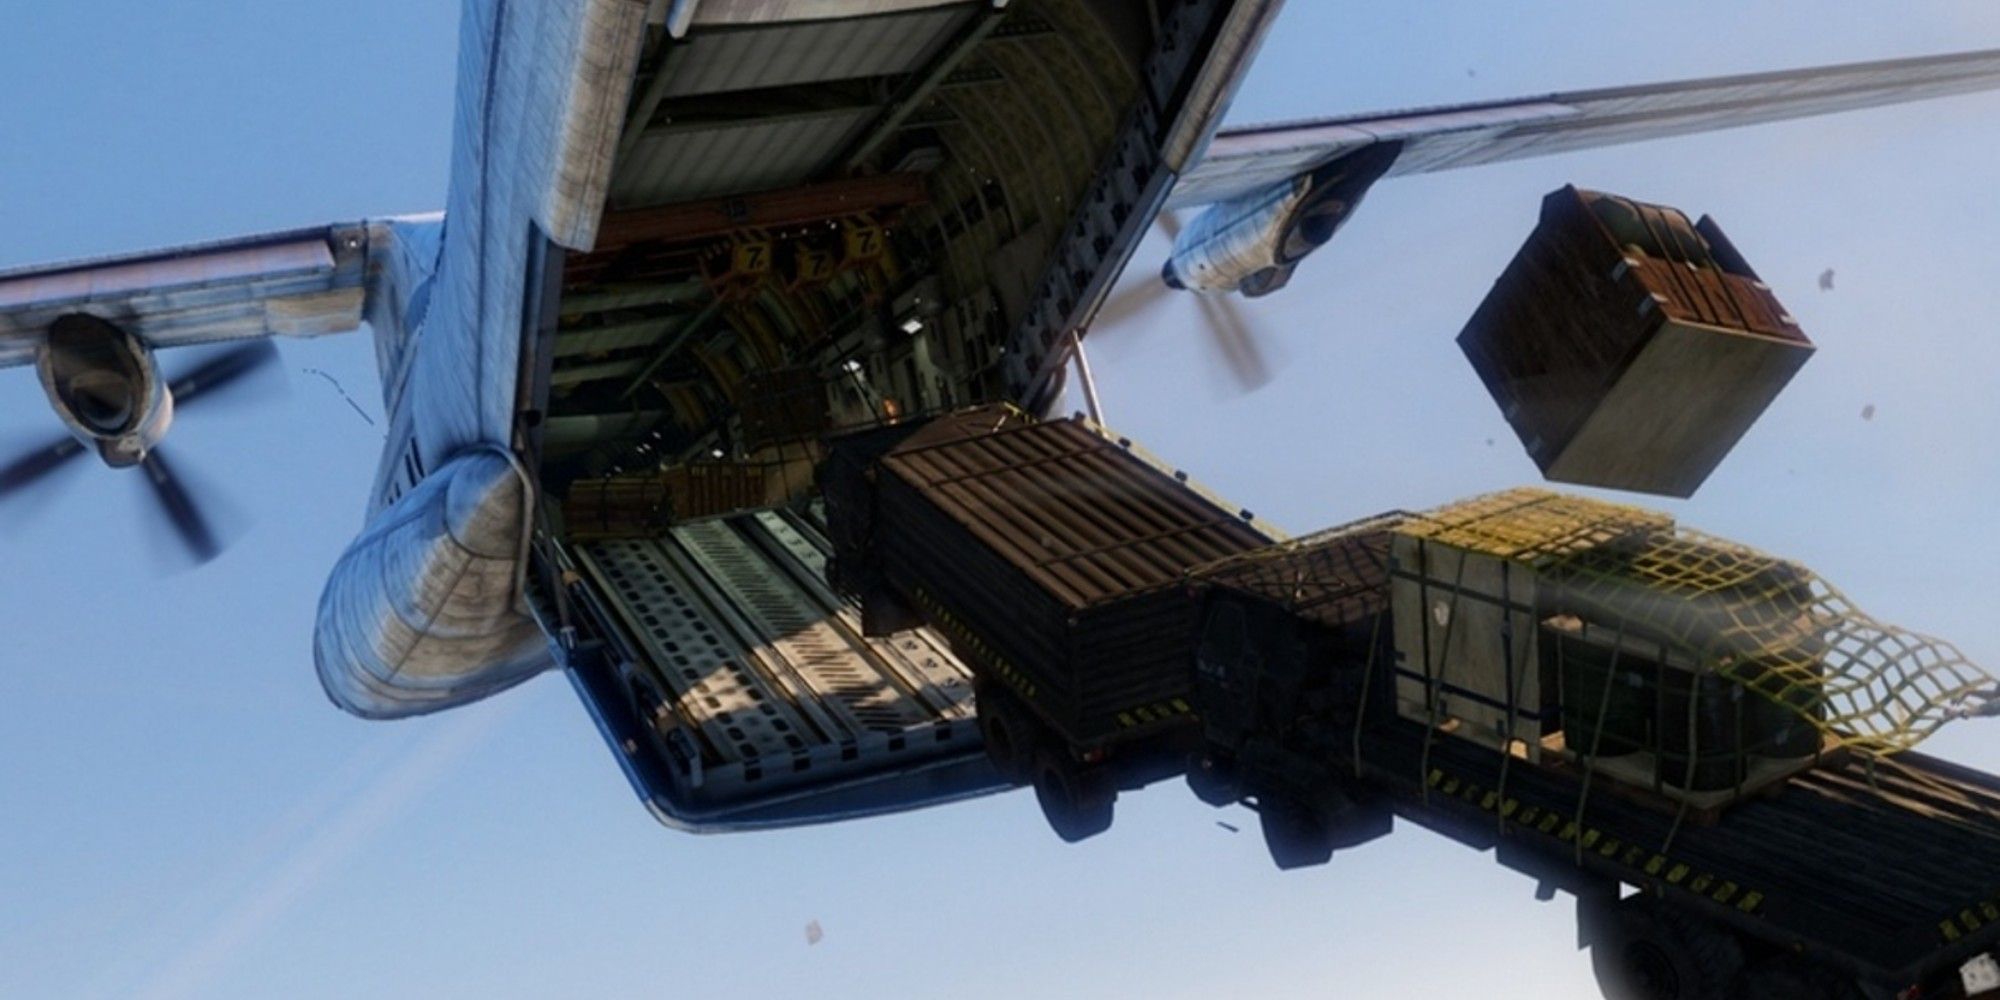 Uncharted Easter Eggs Cargo Plane scene from Uncharted 3: Drake's Deception